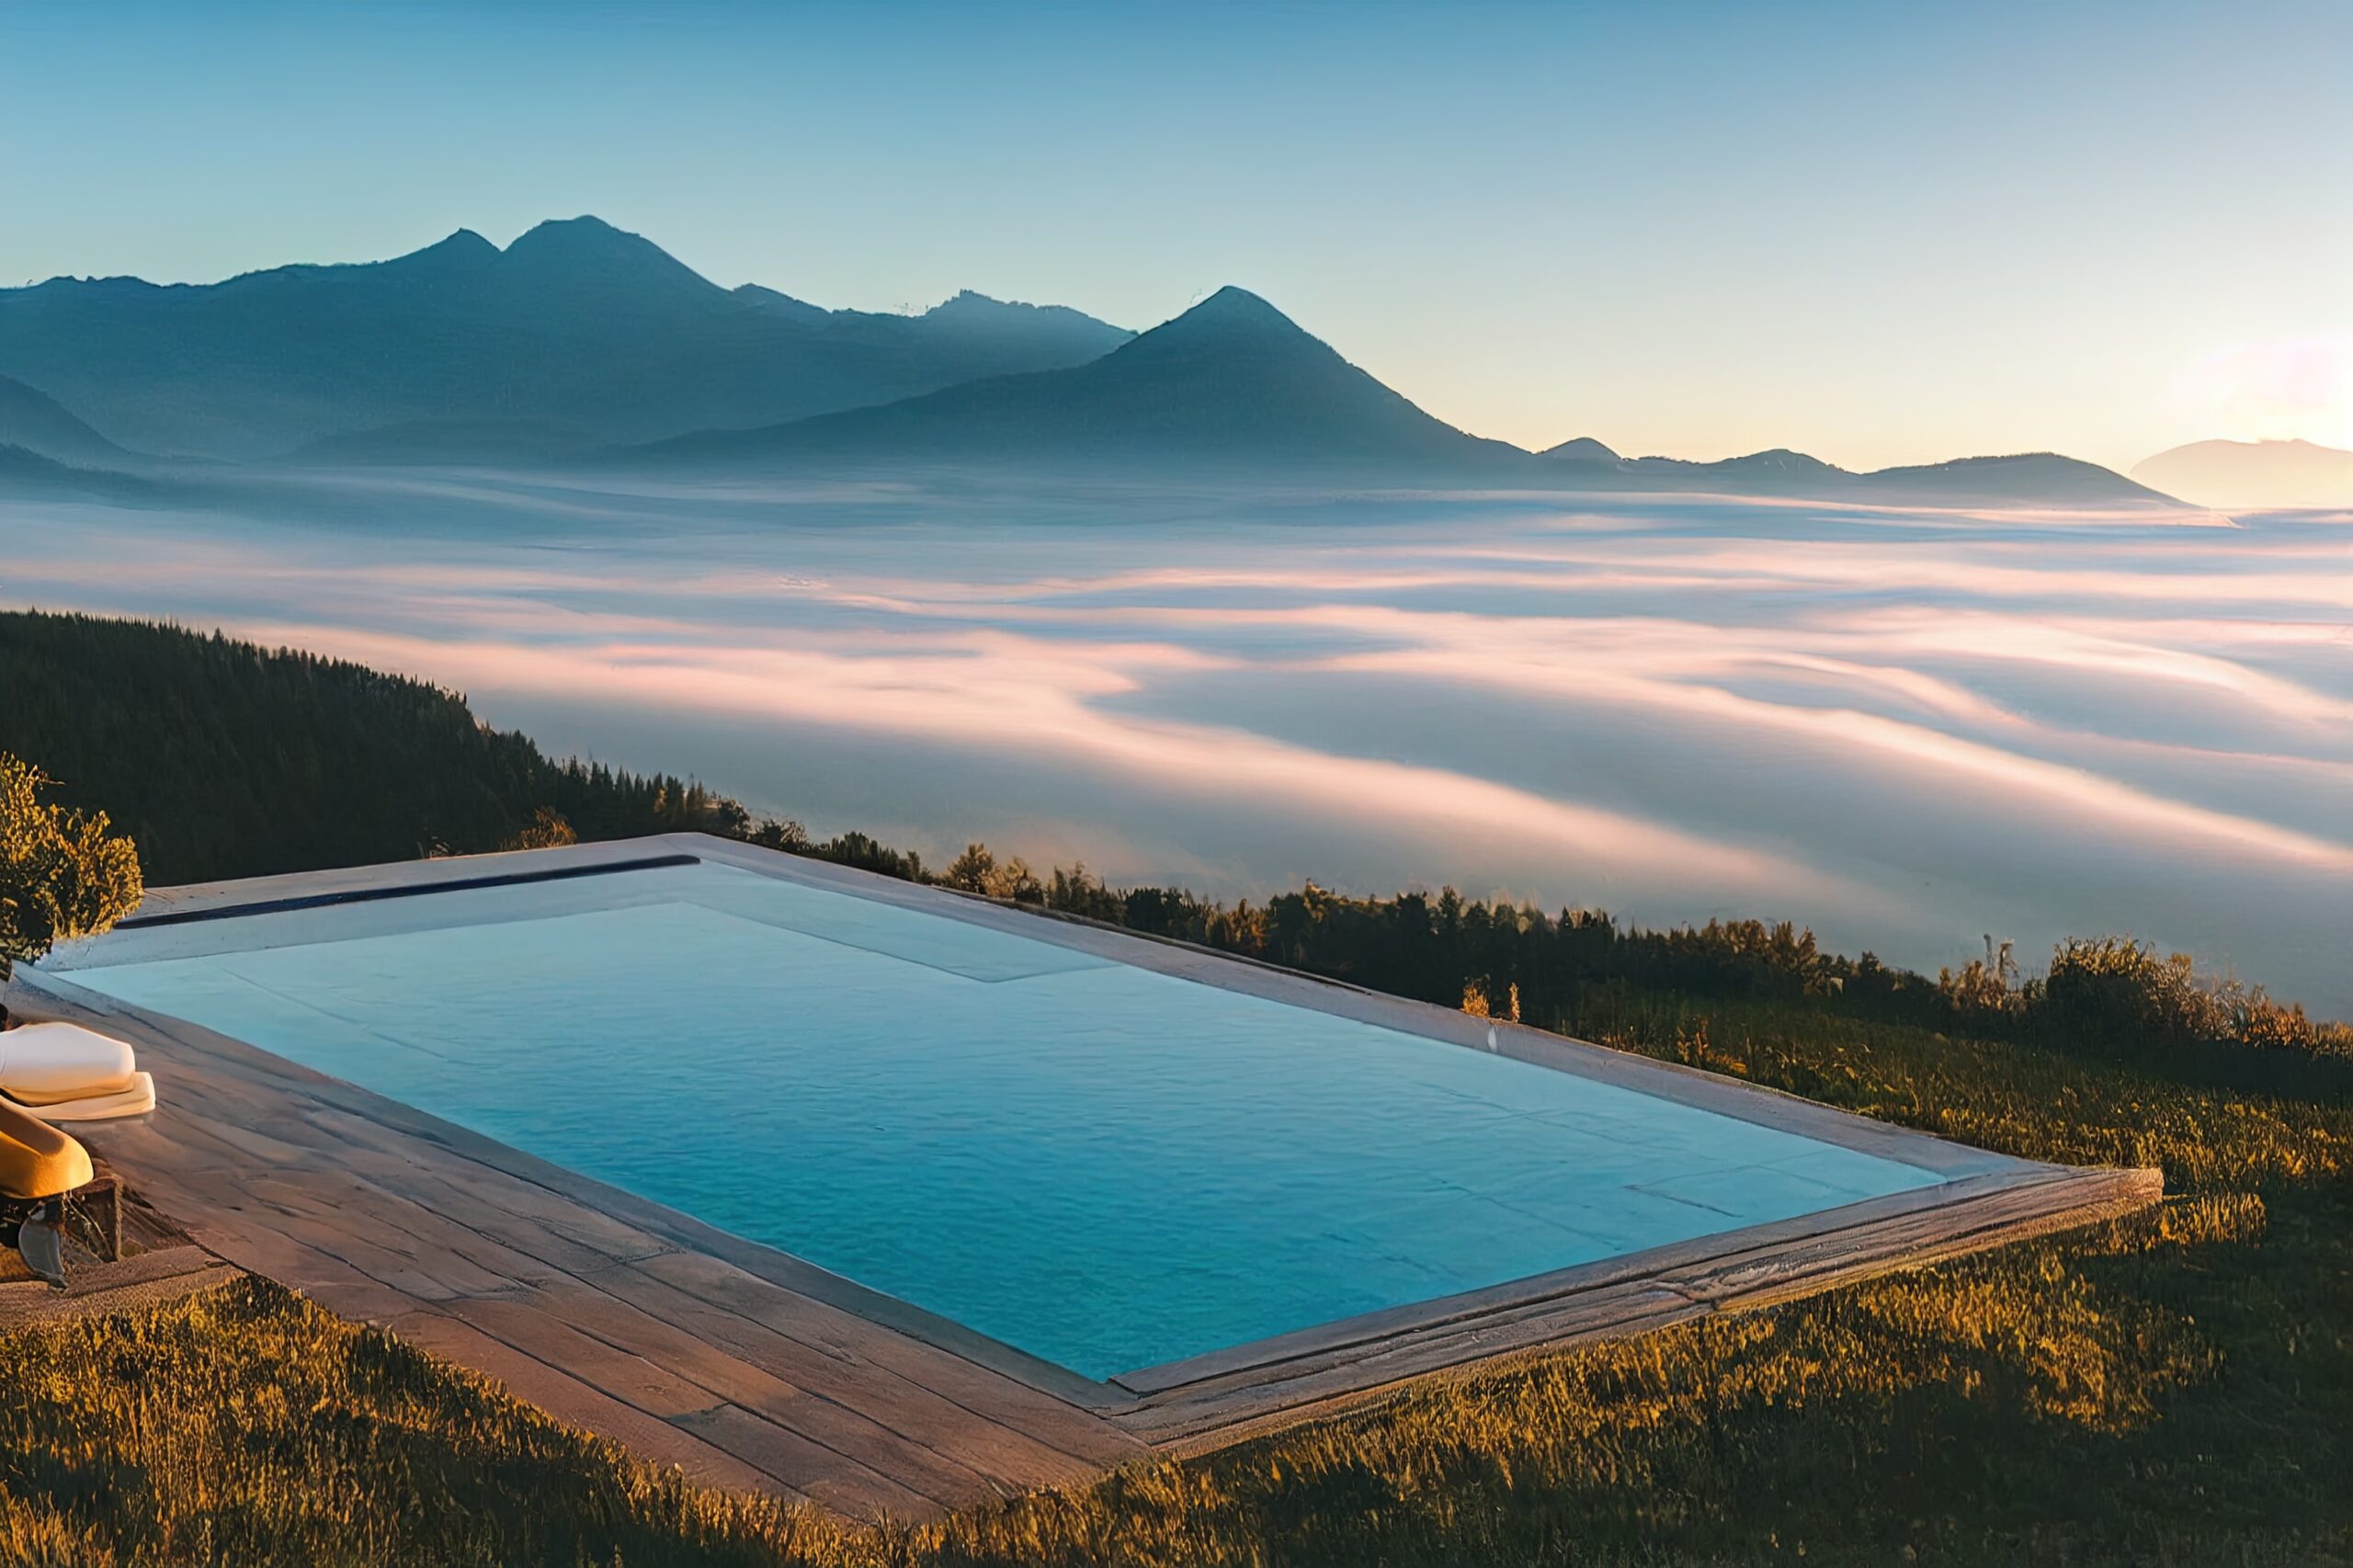 swiss-fixer-swixer-local-production-services-in-switzerland-infinity-outdoor-swimming-pool-overlooking-mountains